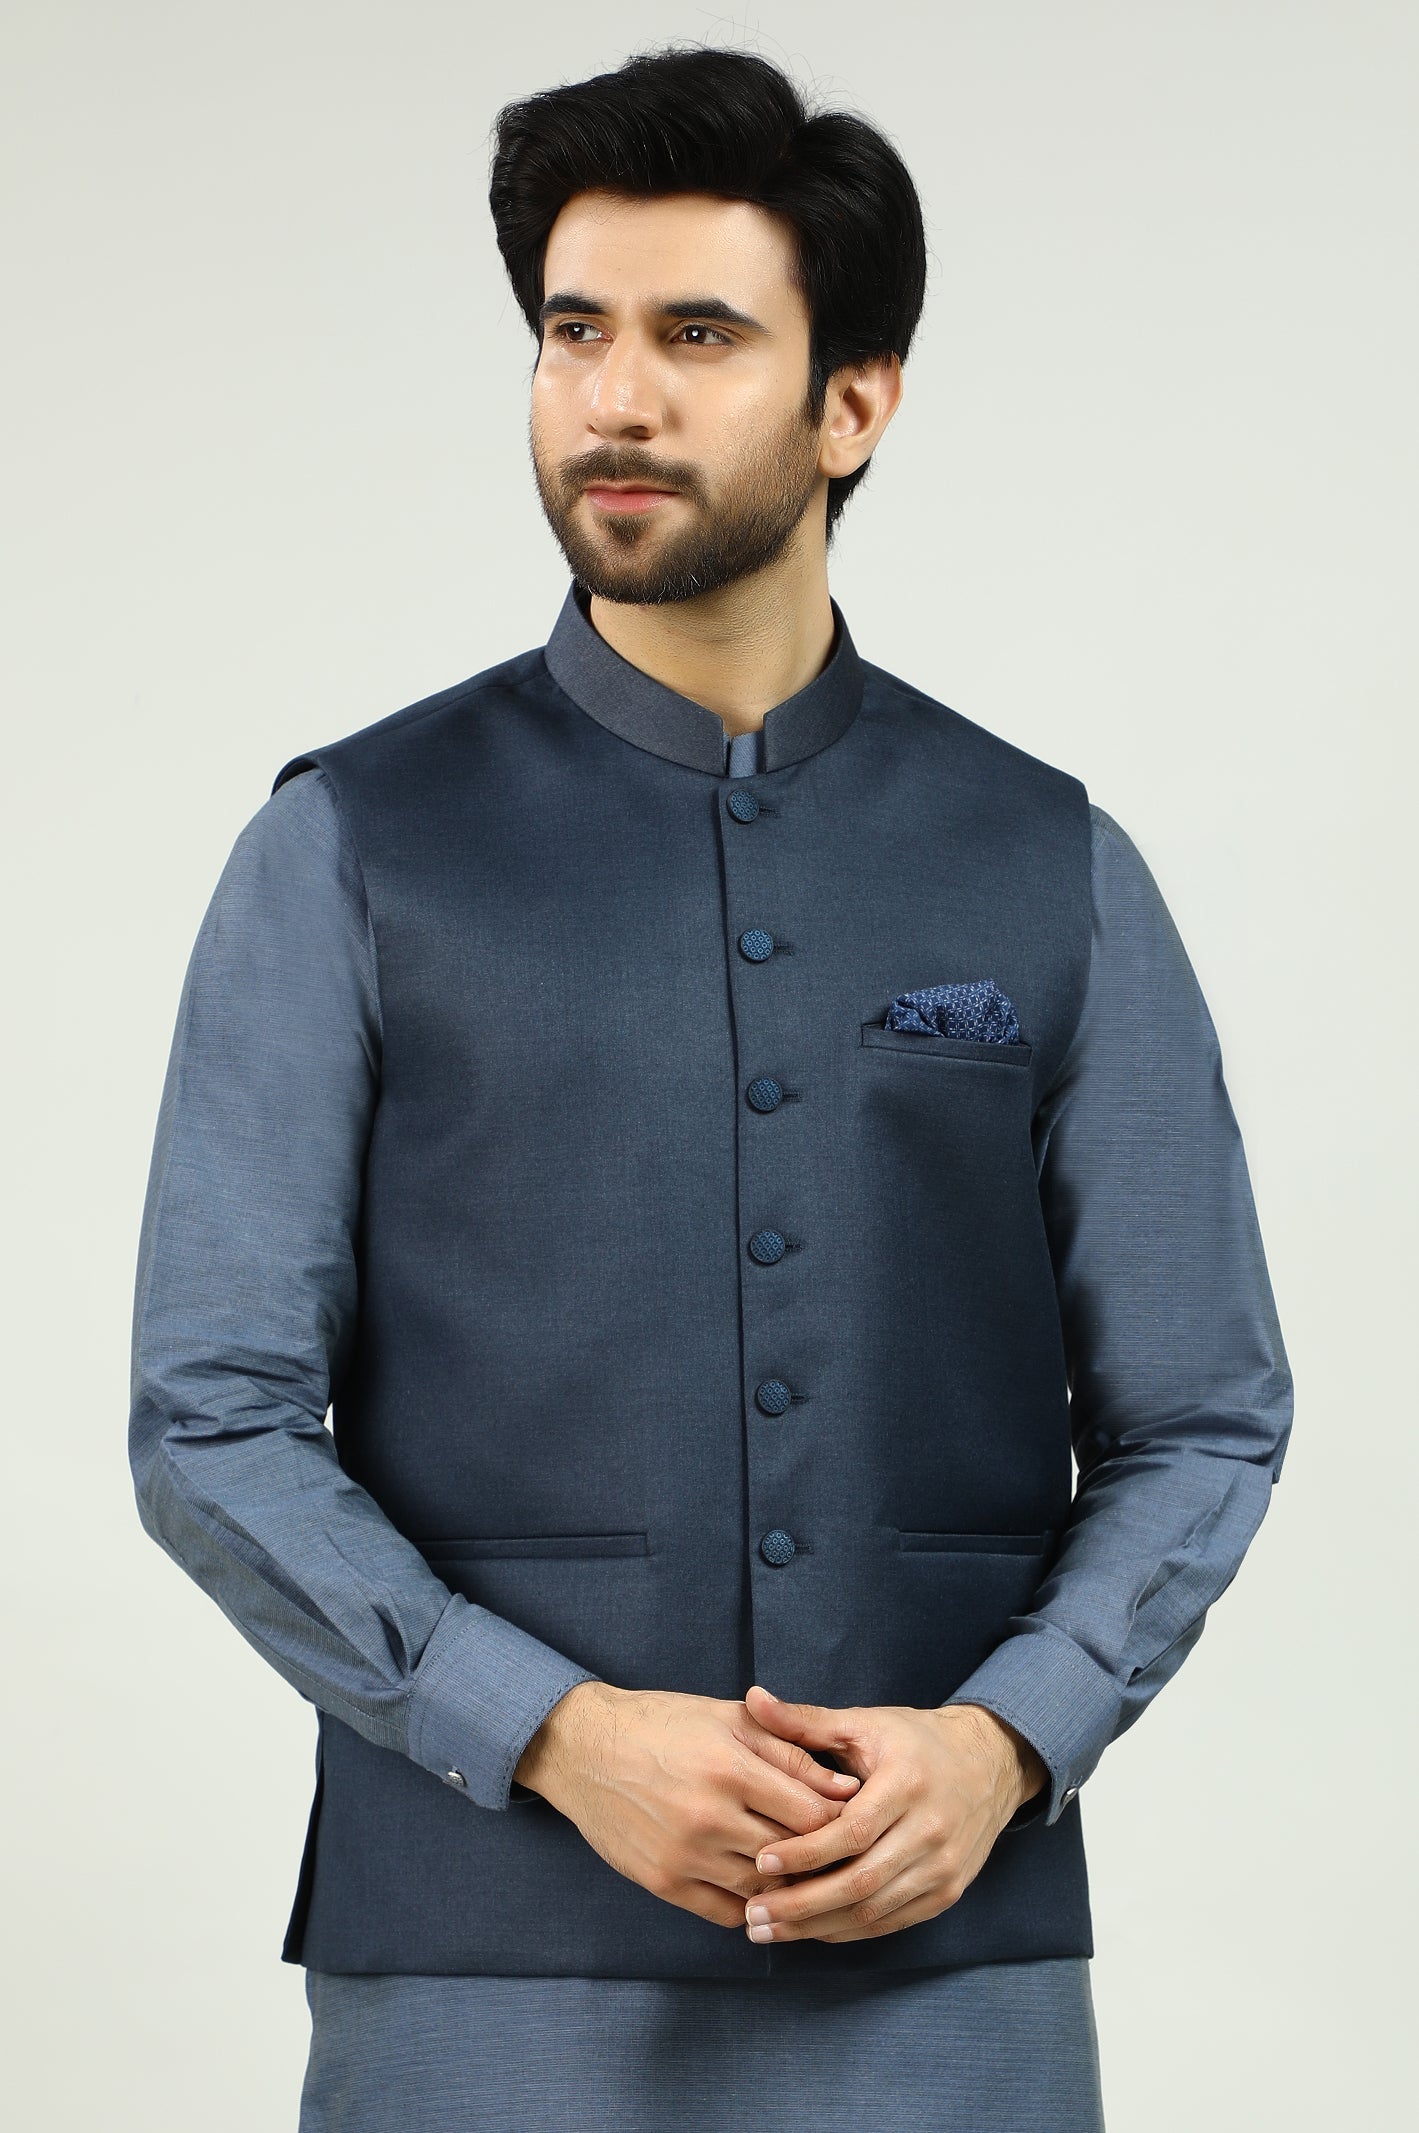 Blue Waistcoat For Men - Diners